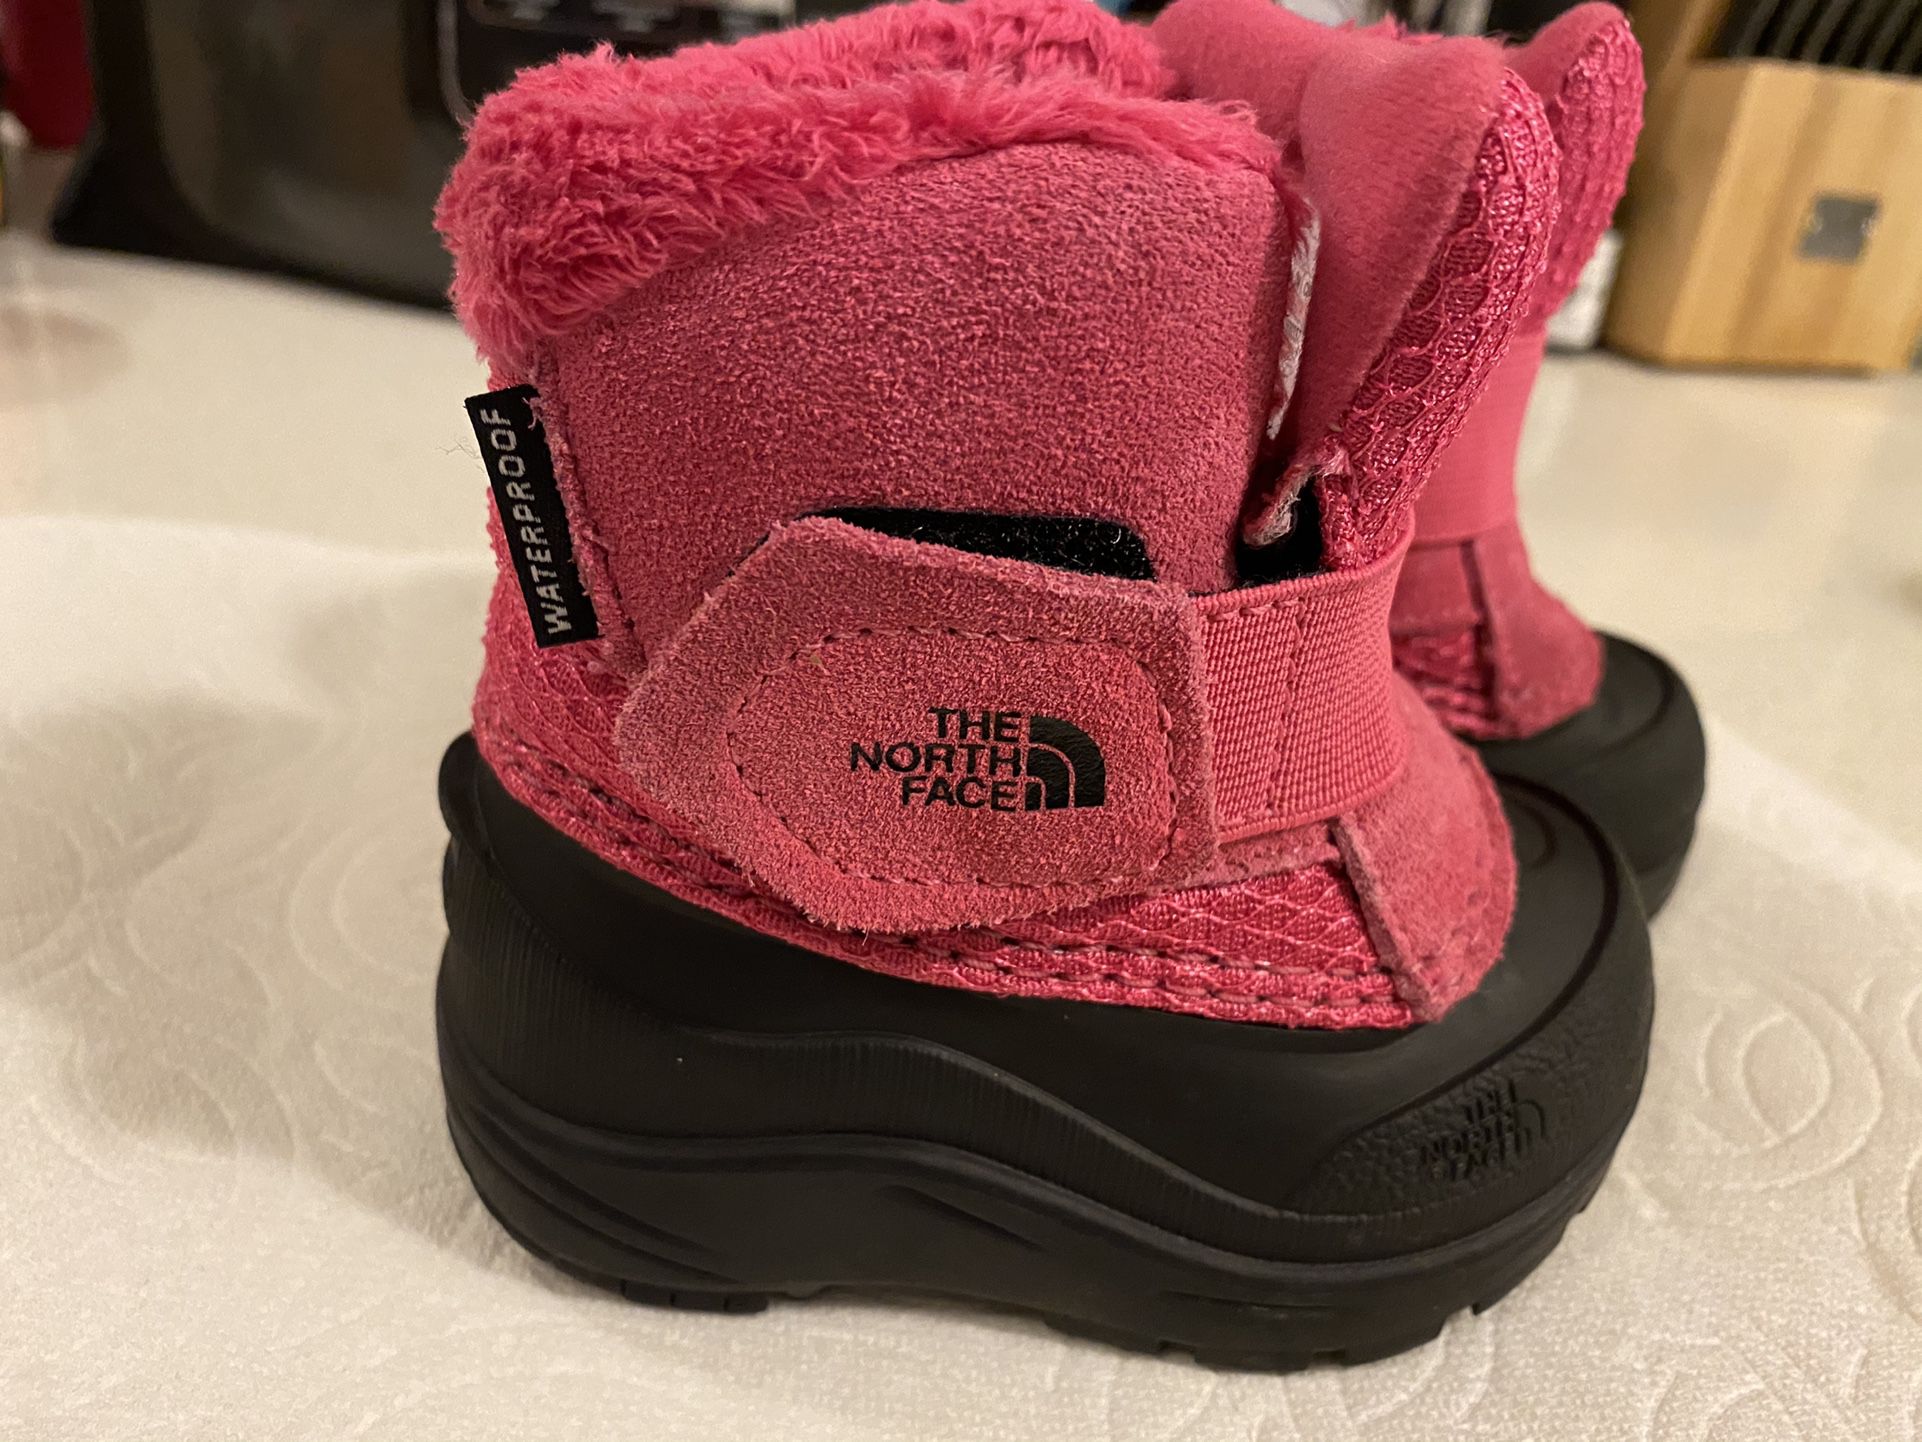 Toddler Size 4 Snow Boots - The North Face Alpenglow II